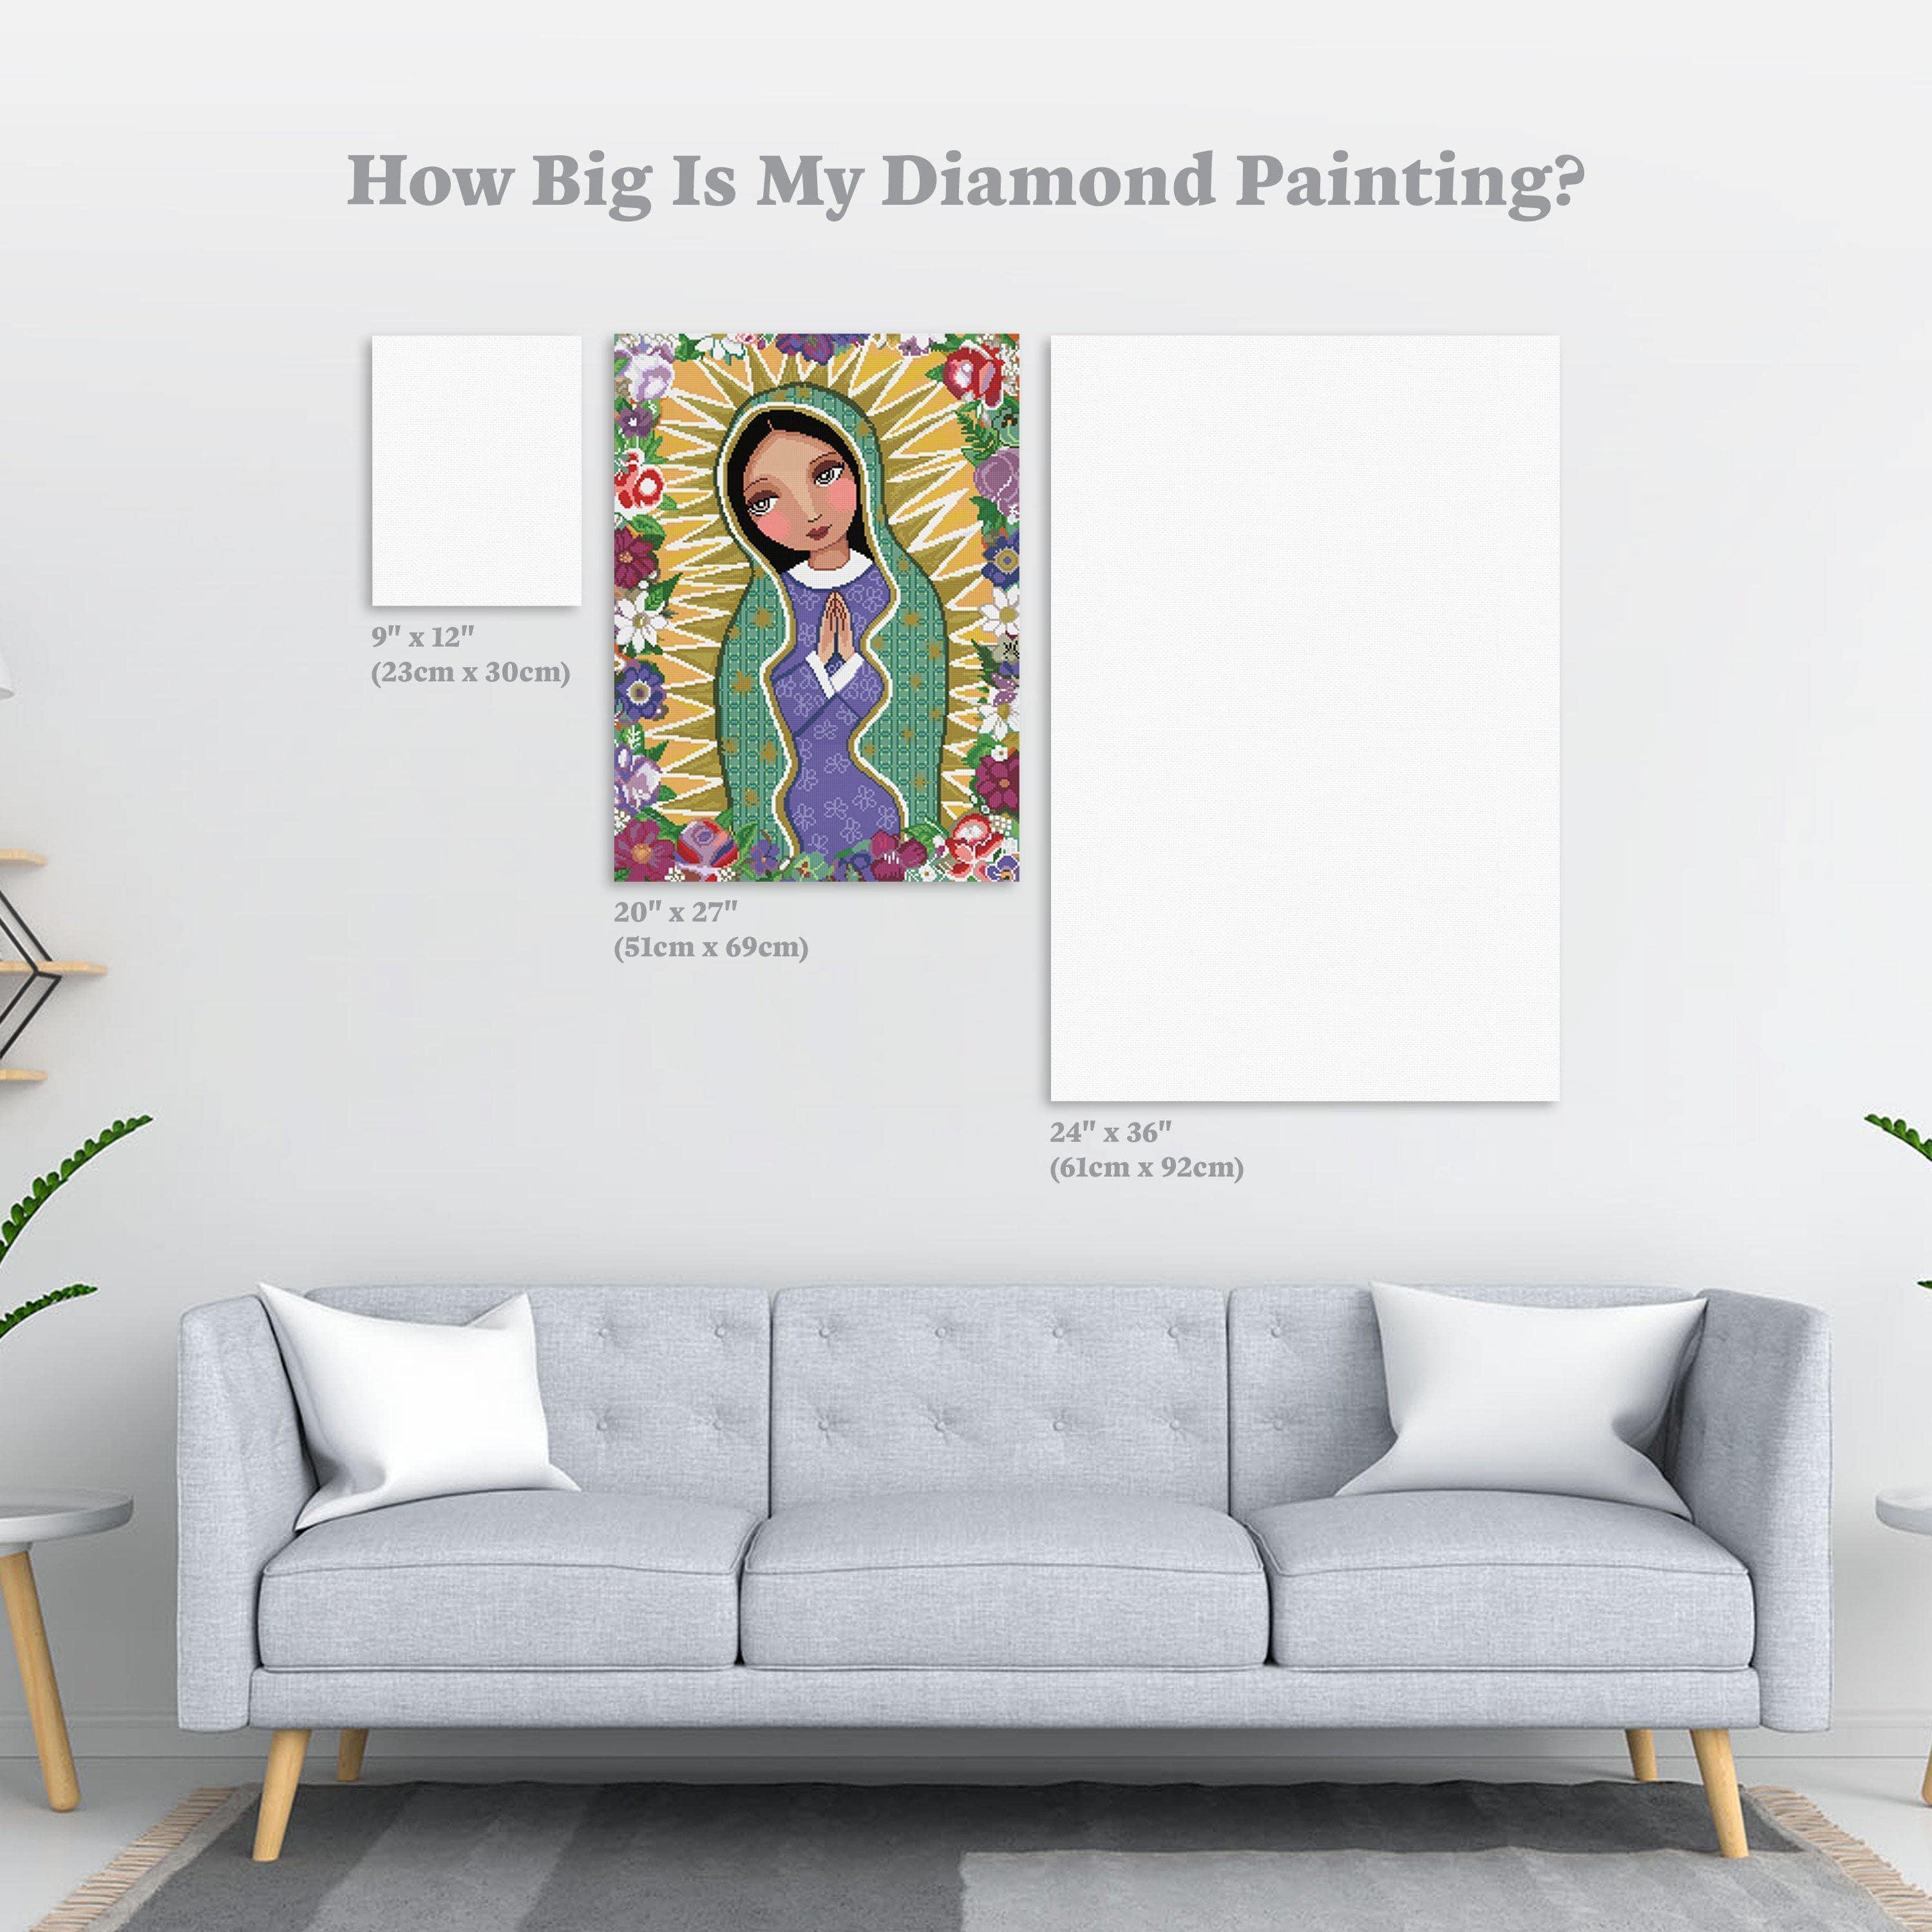 Projects other than wall art? : r/diamondpainting